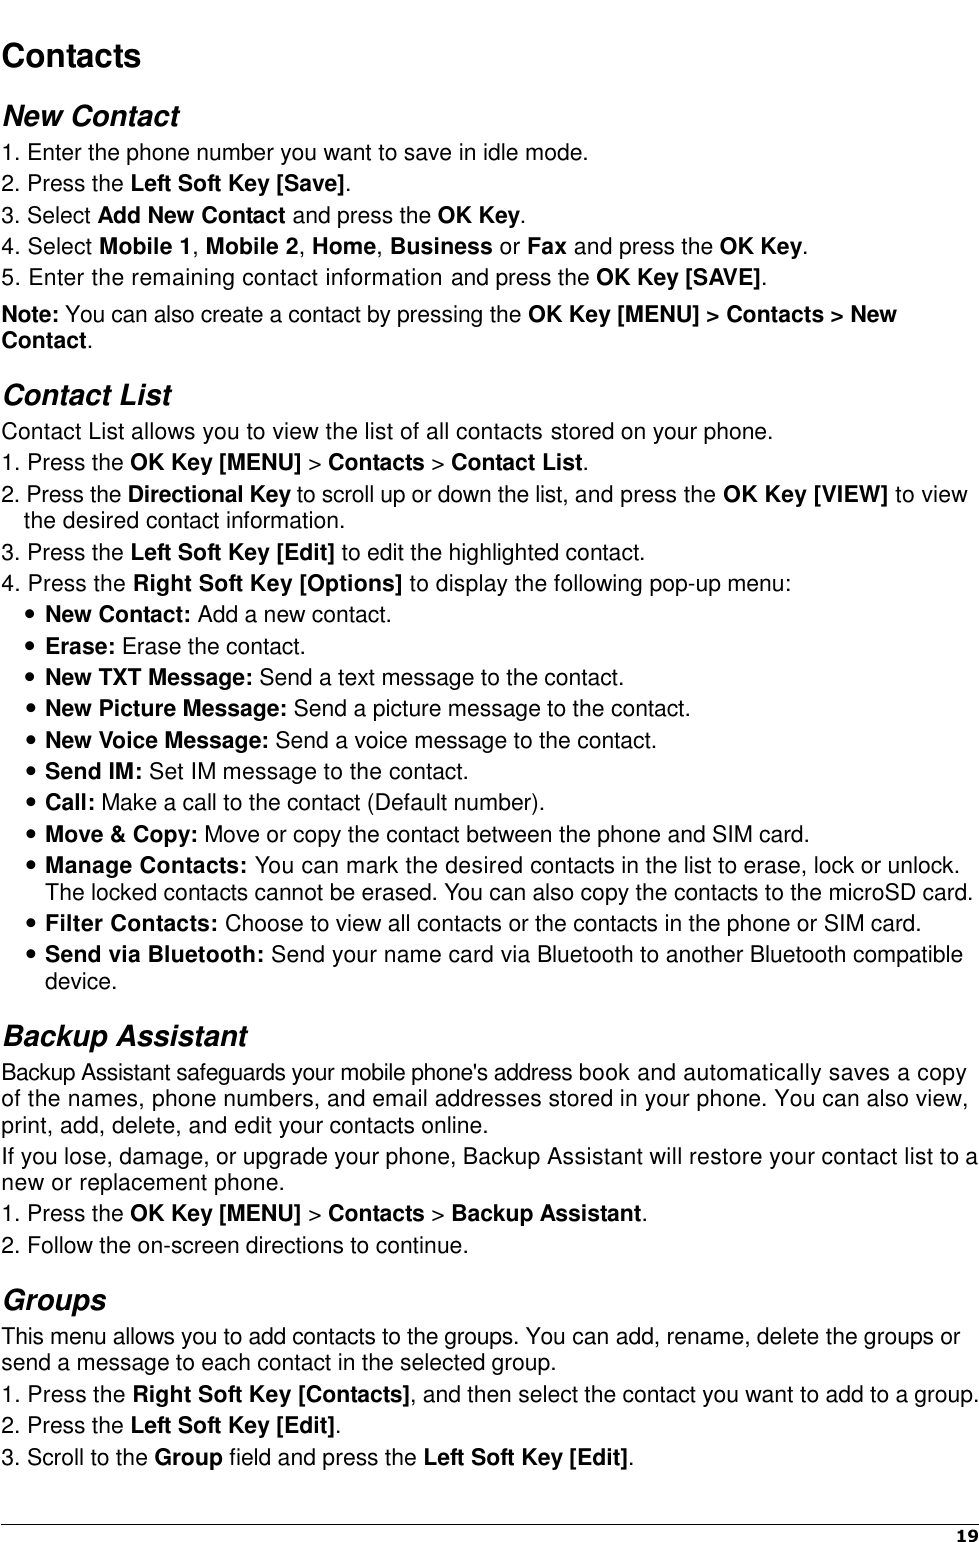    19   Contacts New Contact 1. Enter the phone number you want to save in idle mode. 2. Press the Left Soft Key [Save]. 3. Select Add New Contact and press the OK Key. 4. Select Mobile 1, Mobile 2, Home, Business or Fax and press the OK Key. 5. Enter the remaining contact information and press the OK Key [SAVE]. Note: You can also create a contact by pressing the OK Key [MENU] &gt; Contacts &gt; New Contact. Contact List Contact List allows you to view the list of all contacts stored on your phone. 1. Press the OK Key [MENU] &gt; Contacts &gt; Contact List. 2. Press the Directional Key to scroll up or down the list, and press the OK Key [VIEW] to view the desired contact information.   3. Press the Left Soft Key [Edit] to edit the highlighted contact.   4. Press the Right Soft Key [Options] to display the following pop-up menu:  New Contact: Add a new contact.  Erase: Erase the contact.  New TXT Message: Send a text message to the contact.  New Picture Message: Send a picture message to the contact.  New Voice Message: Send a voice message to the contact.  Send IM: Set IM message to the contact.  Call: Make a call to the contact (Default number).    Move &amp; Copy: Move or copy the contact between the phone and SIM card.  Manage Contacts: You can mark the desired contacts in the list to erase, lock or unlock. The locked contacts cannot be erased. You can also copy the contacts to the microSD card.  Filter Contacts: Choose to view all contacts or the contacts in the phone or SIM card.  Send via Bluetooth: Send your name card via Bluetooth to another Bluetooth compatible device. Backup Assistant Backup Assistant safeguards your mobile phone&apos;s address book and automatically saves a copy of the names, phone numbers, and email addresses stored in your phone. You can also view, print, add, delete, and edit your contacts online.   If you lose, damage, or upgrade your phone, Backup Assistant will restore your contact list to a new or replacement phone.   1. Press the OK Key [MENU] &gt; Contacts &gt; Backup Assistant. 2. Follow the on-screen directions to continue. Groups This menu allows you to add contacts to the groups. You can add, rename, delete the groups or send a message to each contact in the selected group.   1. Press the Right Soft Key [Contacts], and then select the contact you want to add to a group. 2. Press the Left Soft Key [Edit]. 3. Scroll to the Group field and press the Left Soft Key [Edit]. 